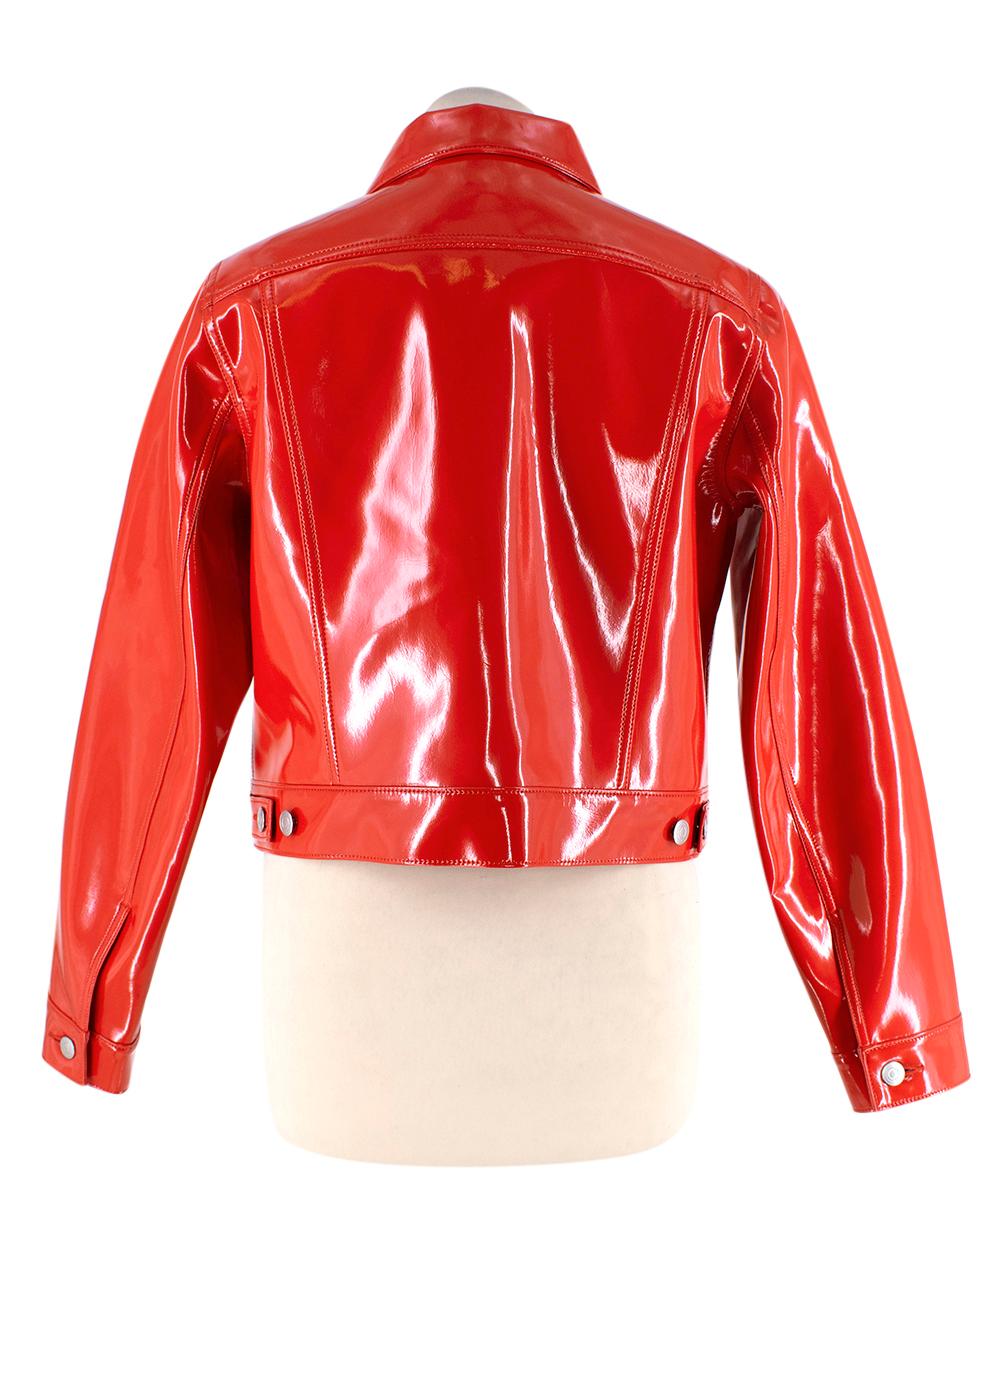 Comme des Garcons Red Vinyl Cropped Jacket

- Cropped, button through jacket in vivid red, high shine vinyl
- Point collar, patch pockets, long sleeve 
- Decorative topstitching
- Boxy cut

Materials 
100% Polyurethane 
85% Nylon
15% Polyurethane